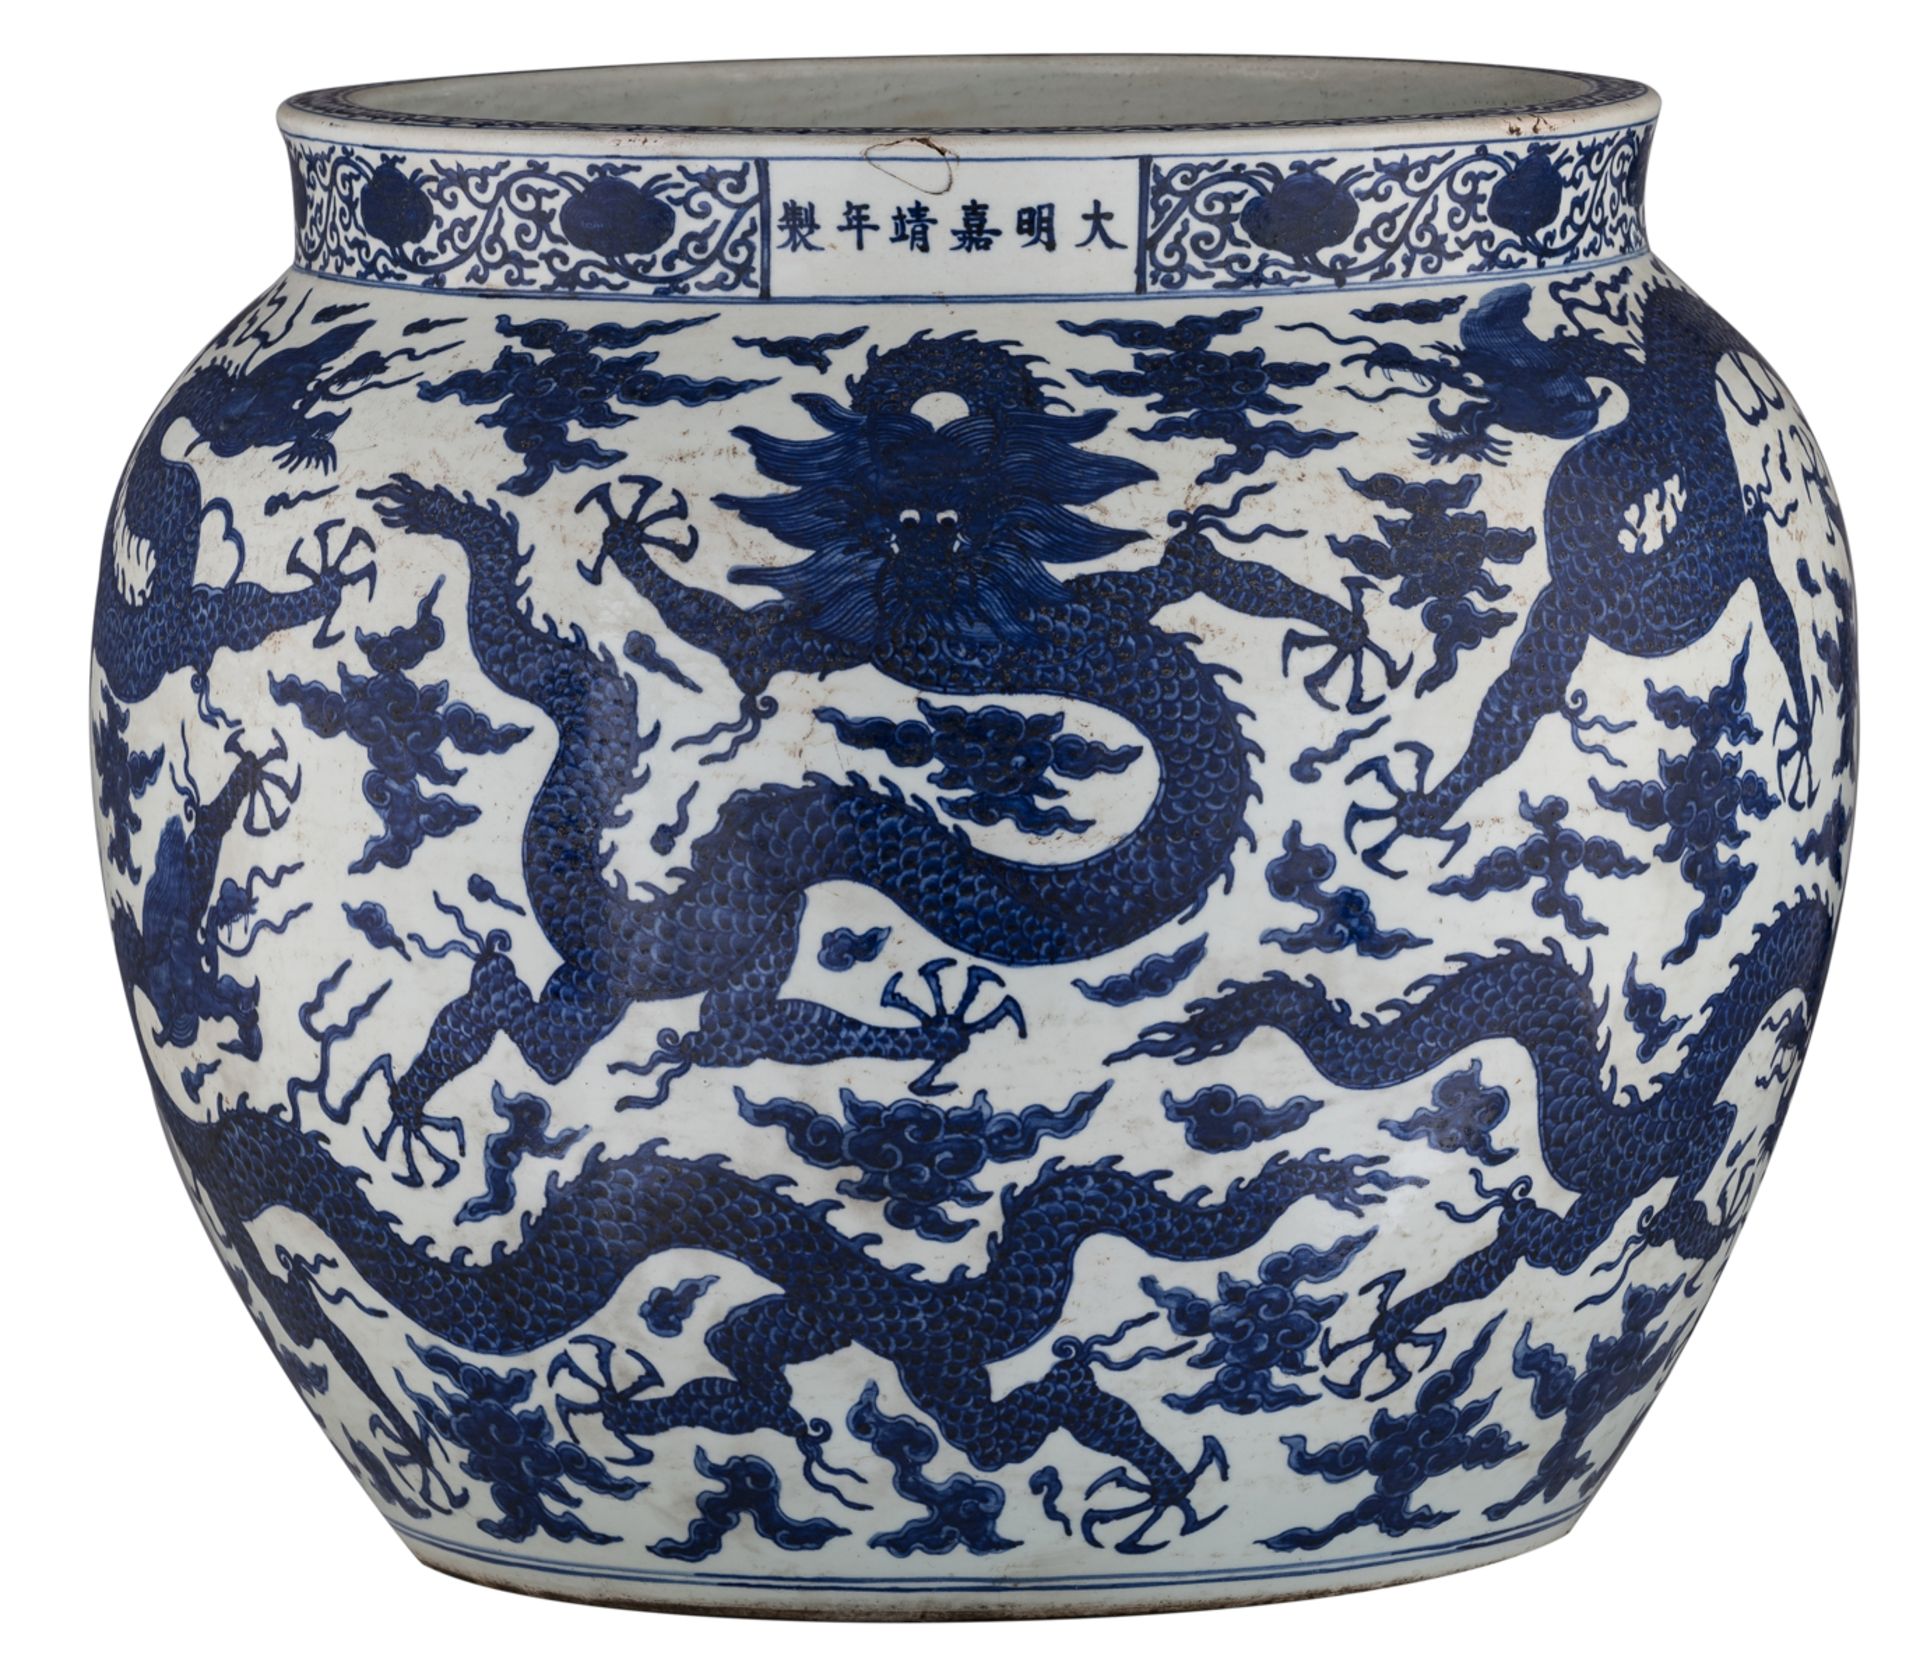 A Chinese blue and white fishbowl, overall decorated with dragons amongst clouds, H 58 - ø 70 cm